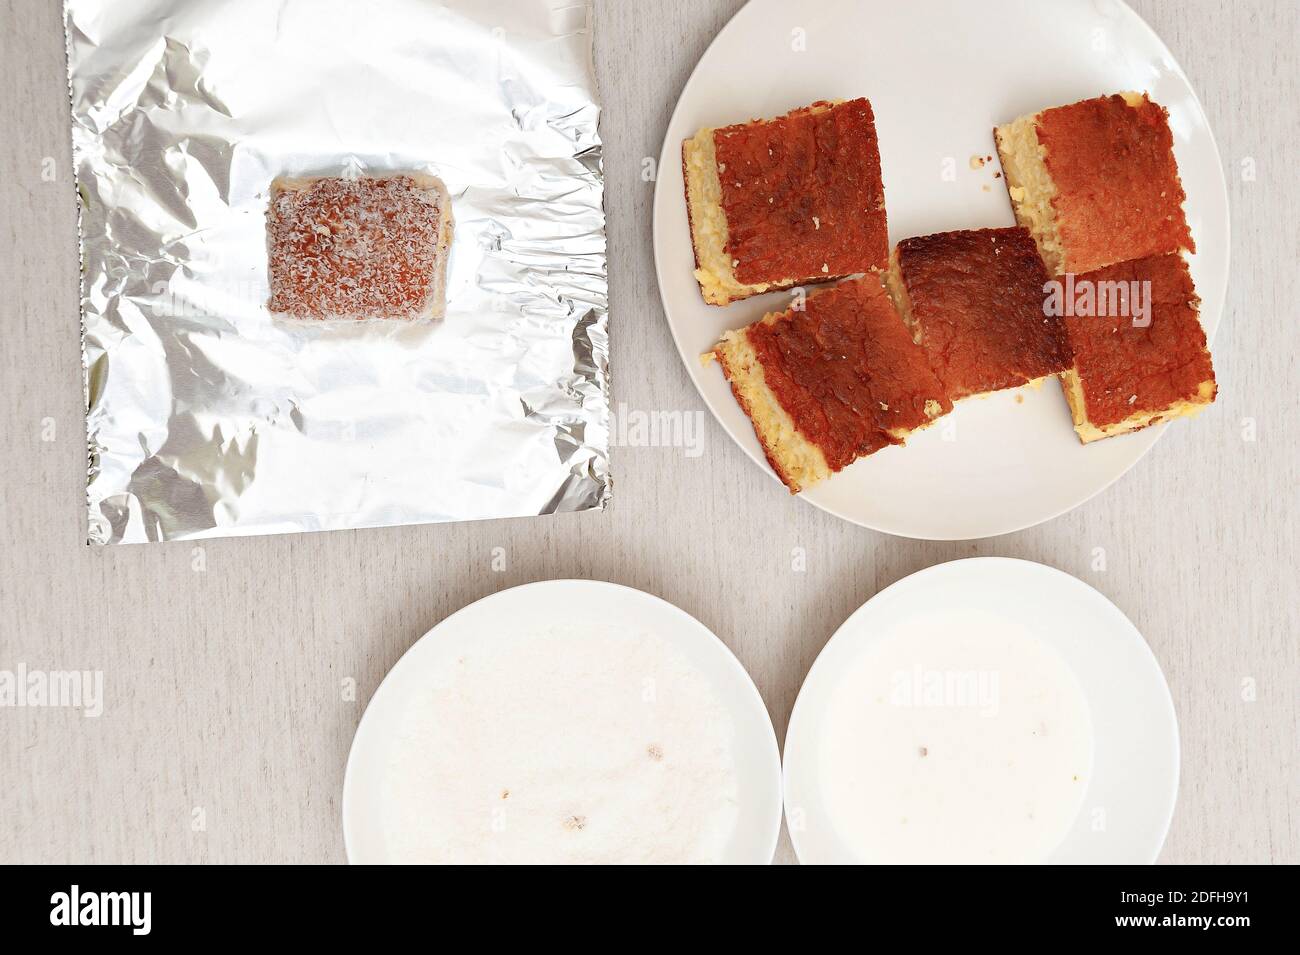 Cakes in foil pans stock photo. Image of homemade, brown - 180386150